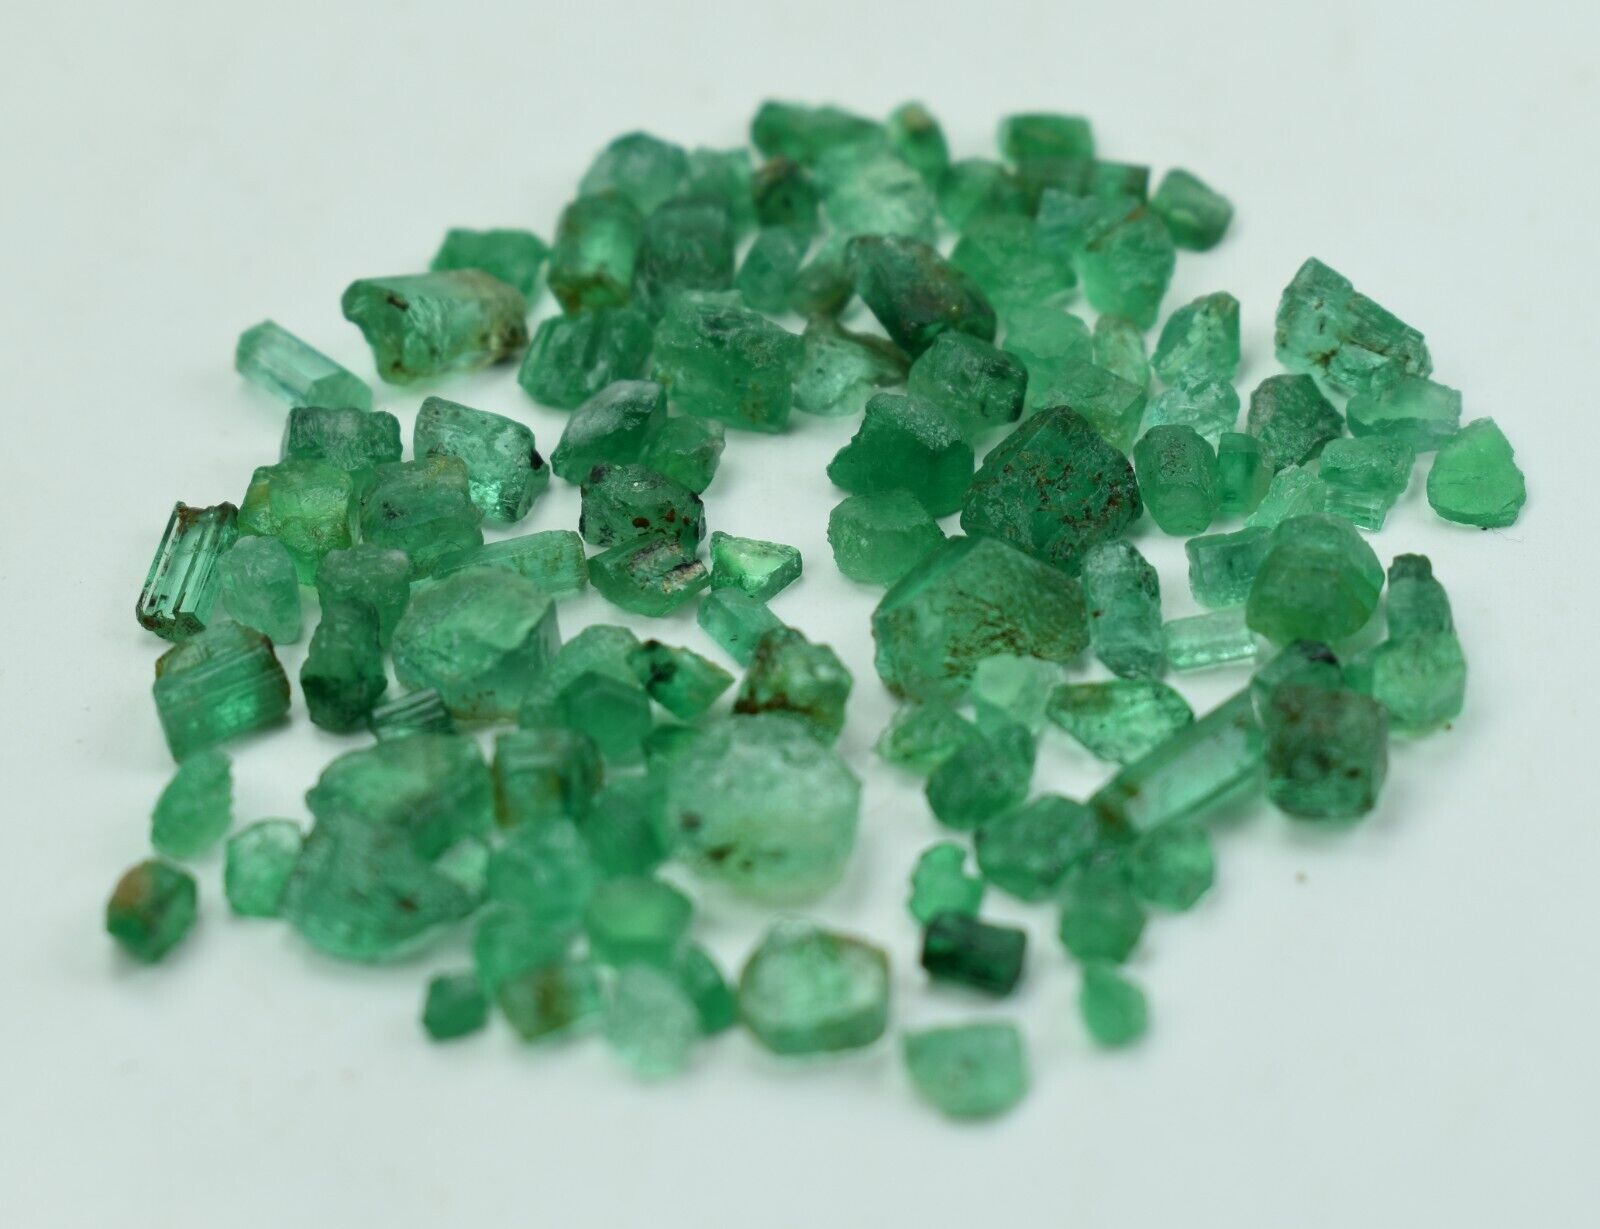 44 Carat Top Quality Green Color Panjshir Emerald Crystal from Rough Afghanistan